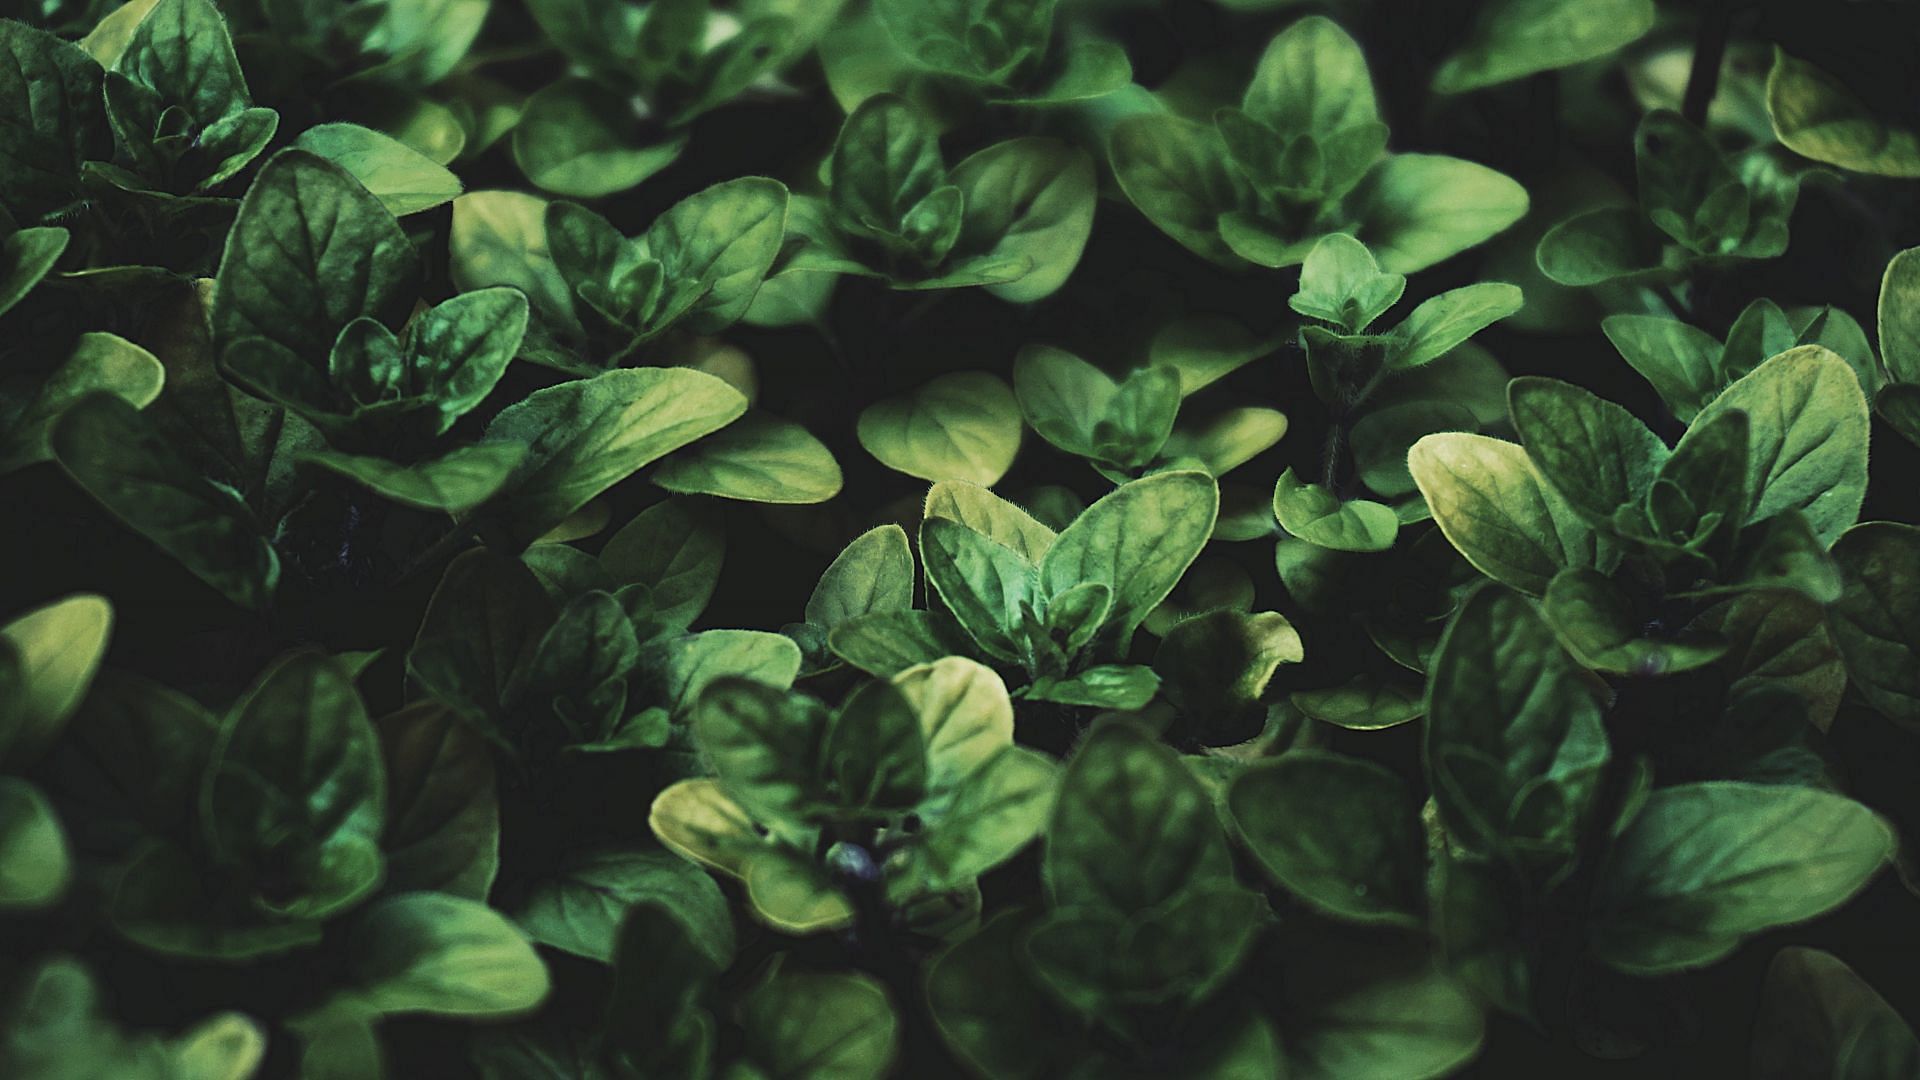 Basil essential oil benefits (image sourced via Pexels / Photo by suzy)